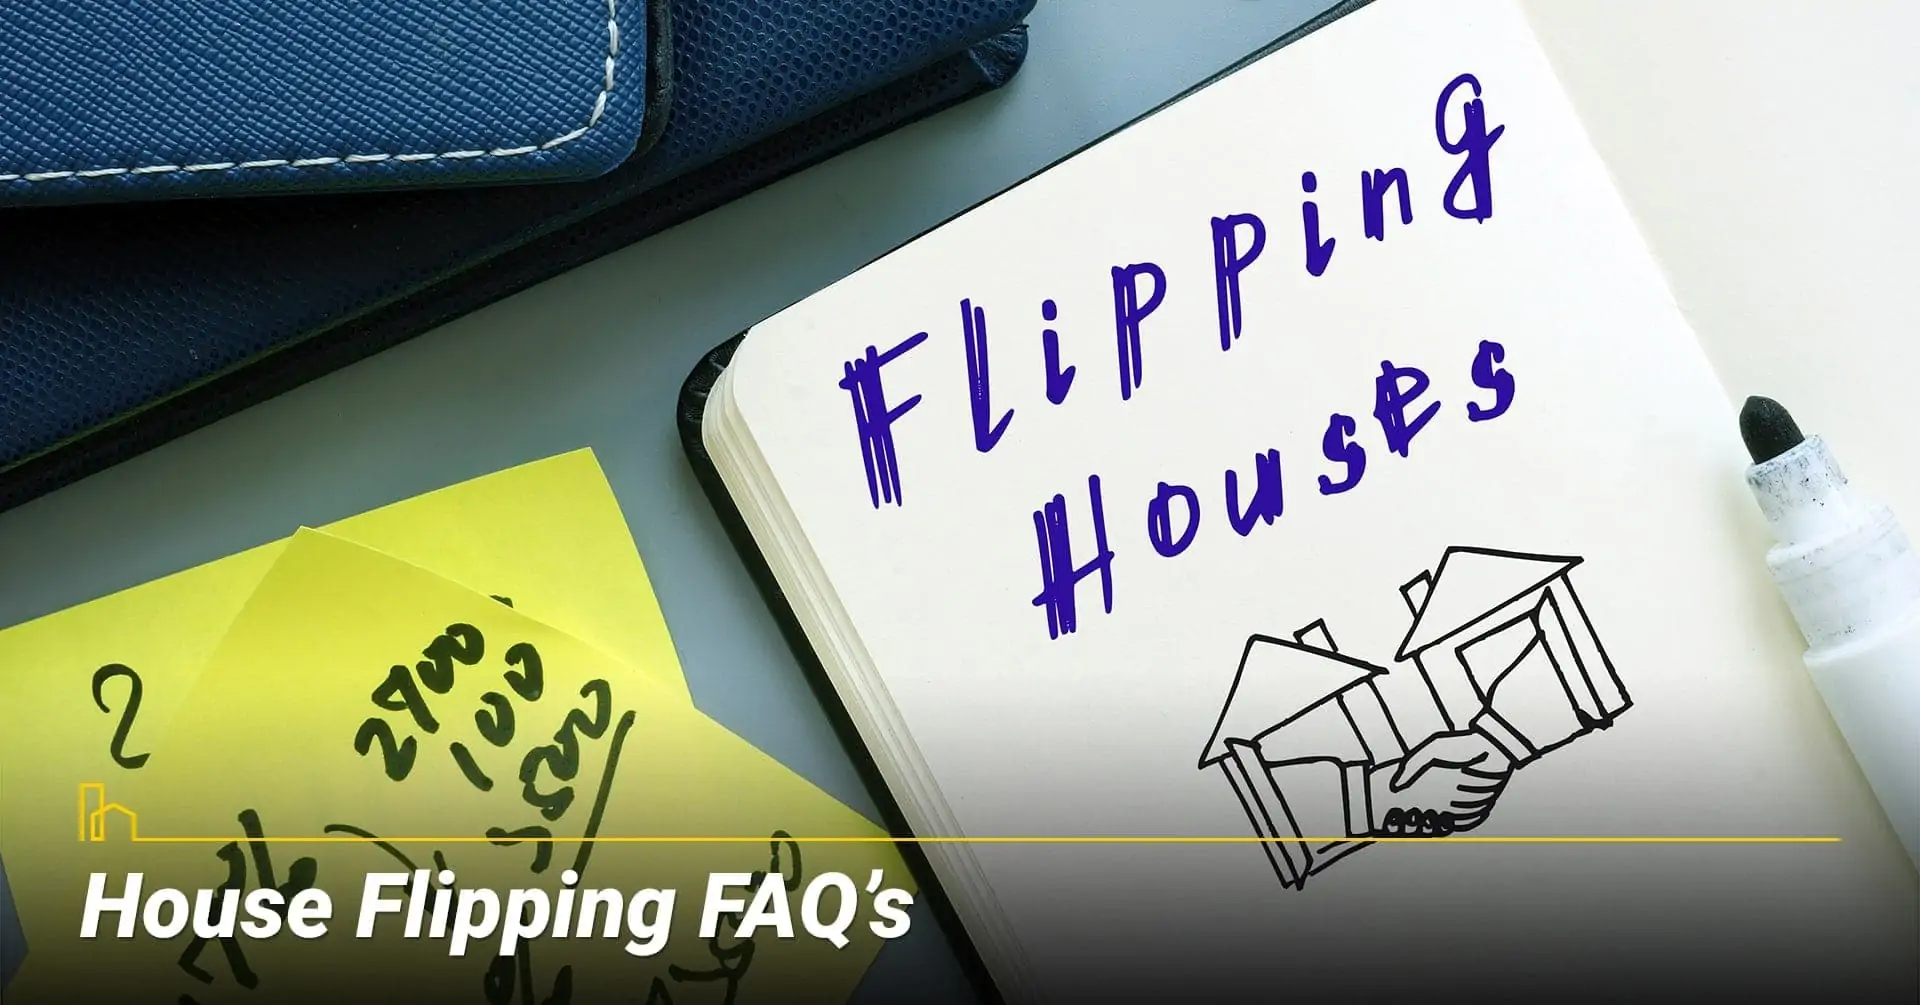 House Flipping FAQ’s, ask questions about flipping a house